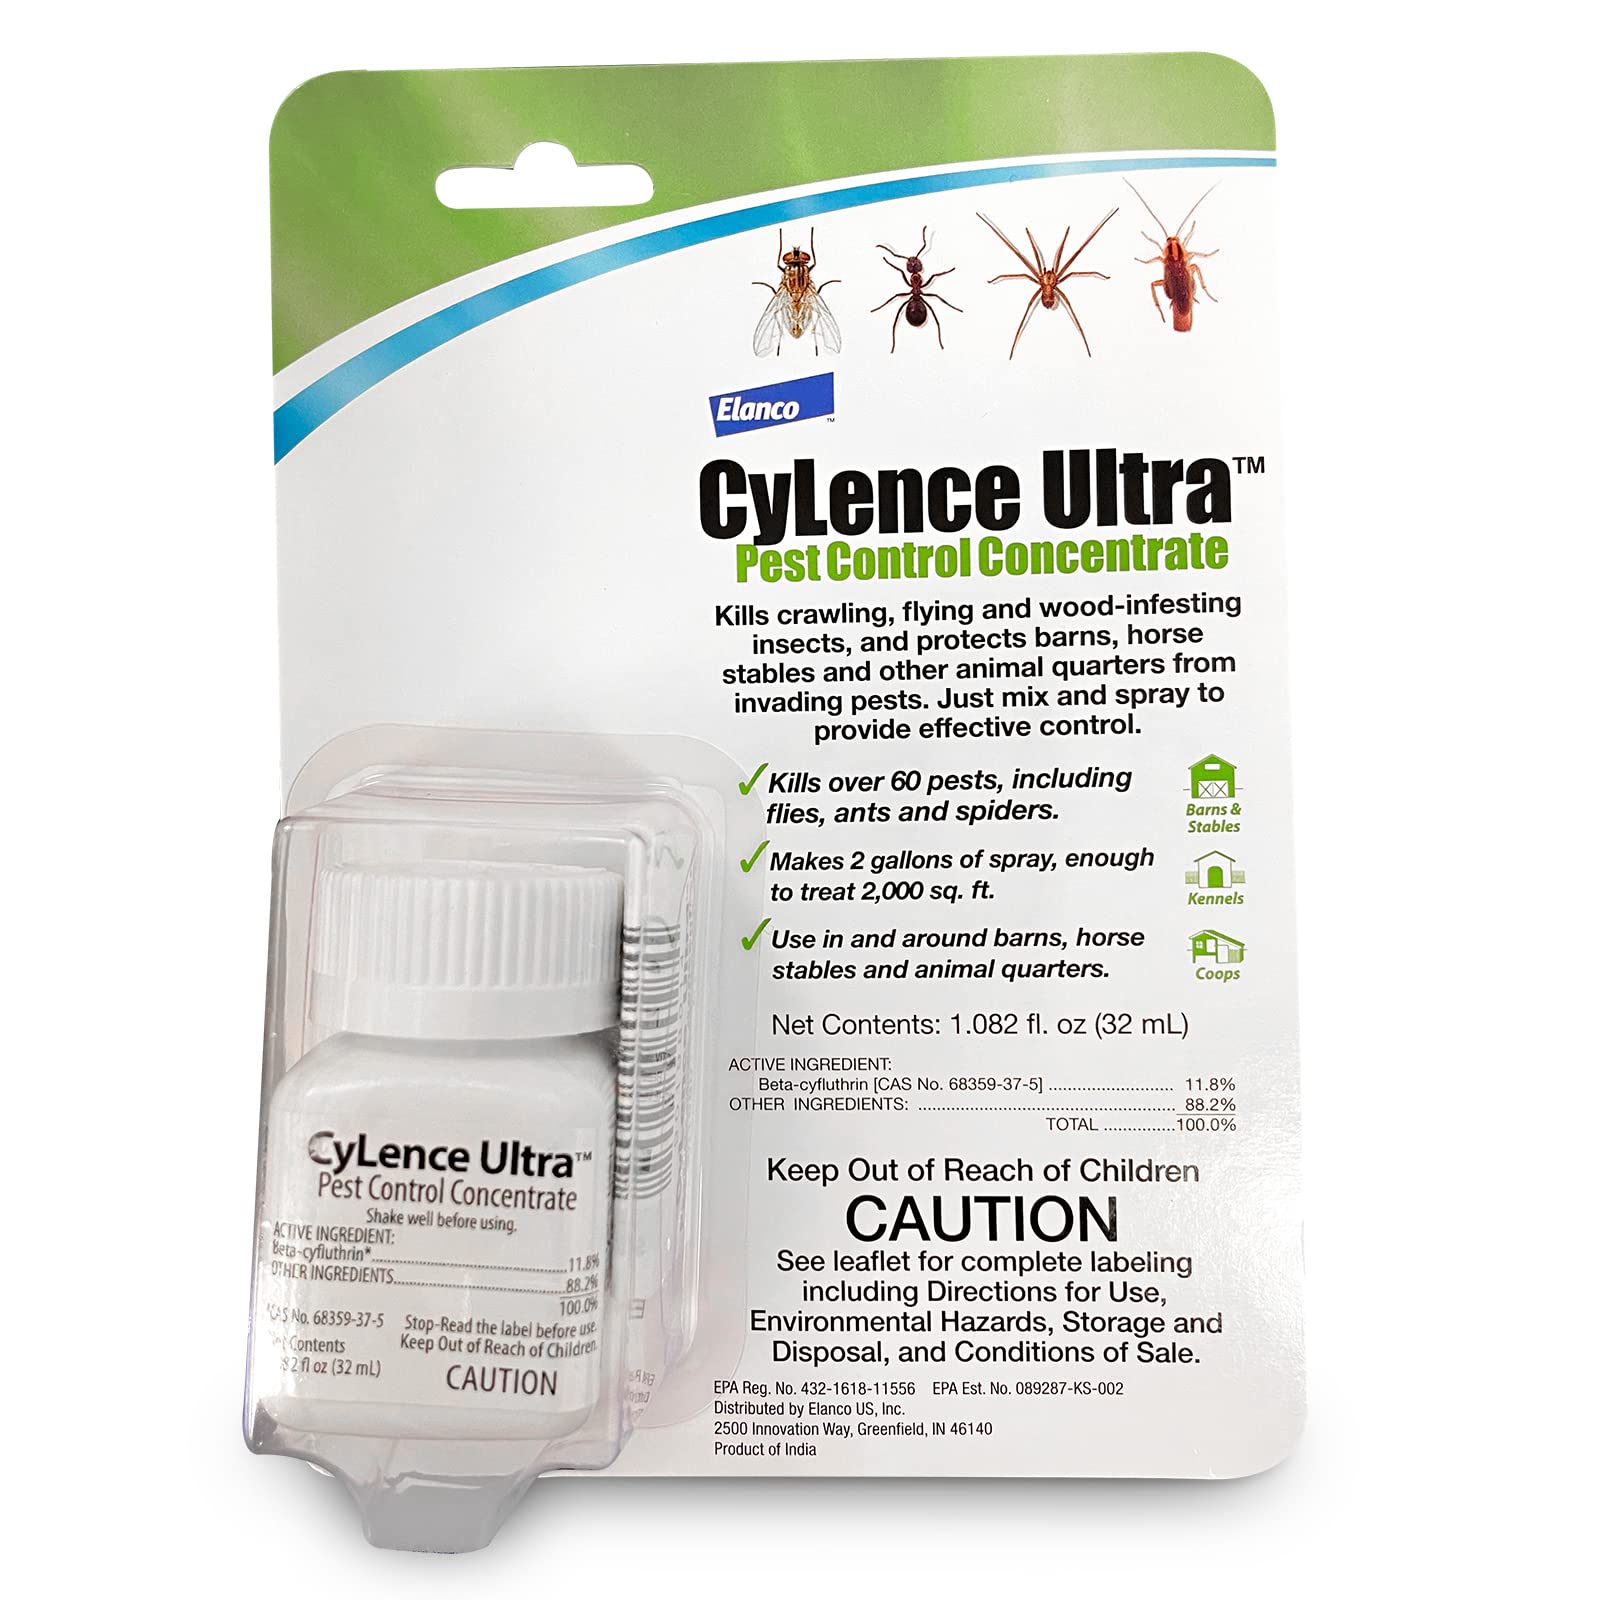 Cylence Ultra Pest Control Concentrate- Bayer Stink Bug Killer - Ant Traps Indoor - Bed Bug Killer - Insecticide Concentrate - Tick Control - Available with Premium Quality Centaurus AZ Gloves- 32ml